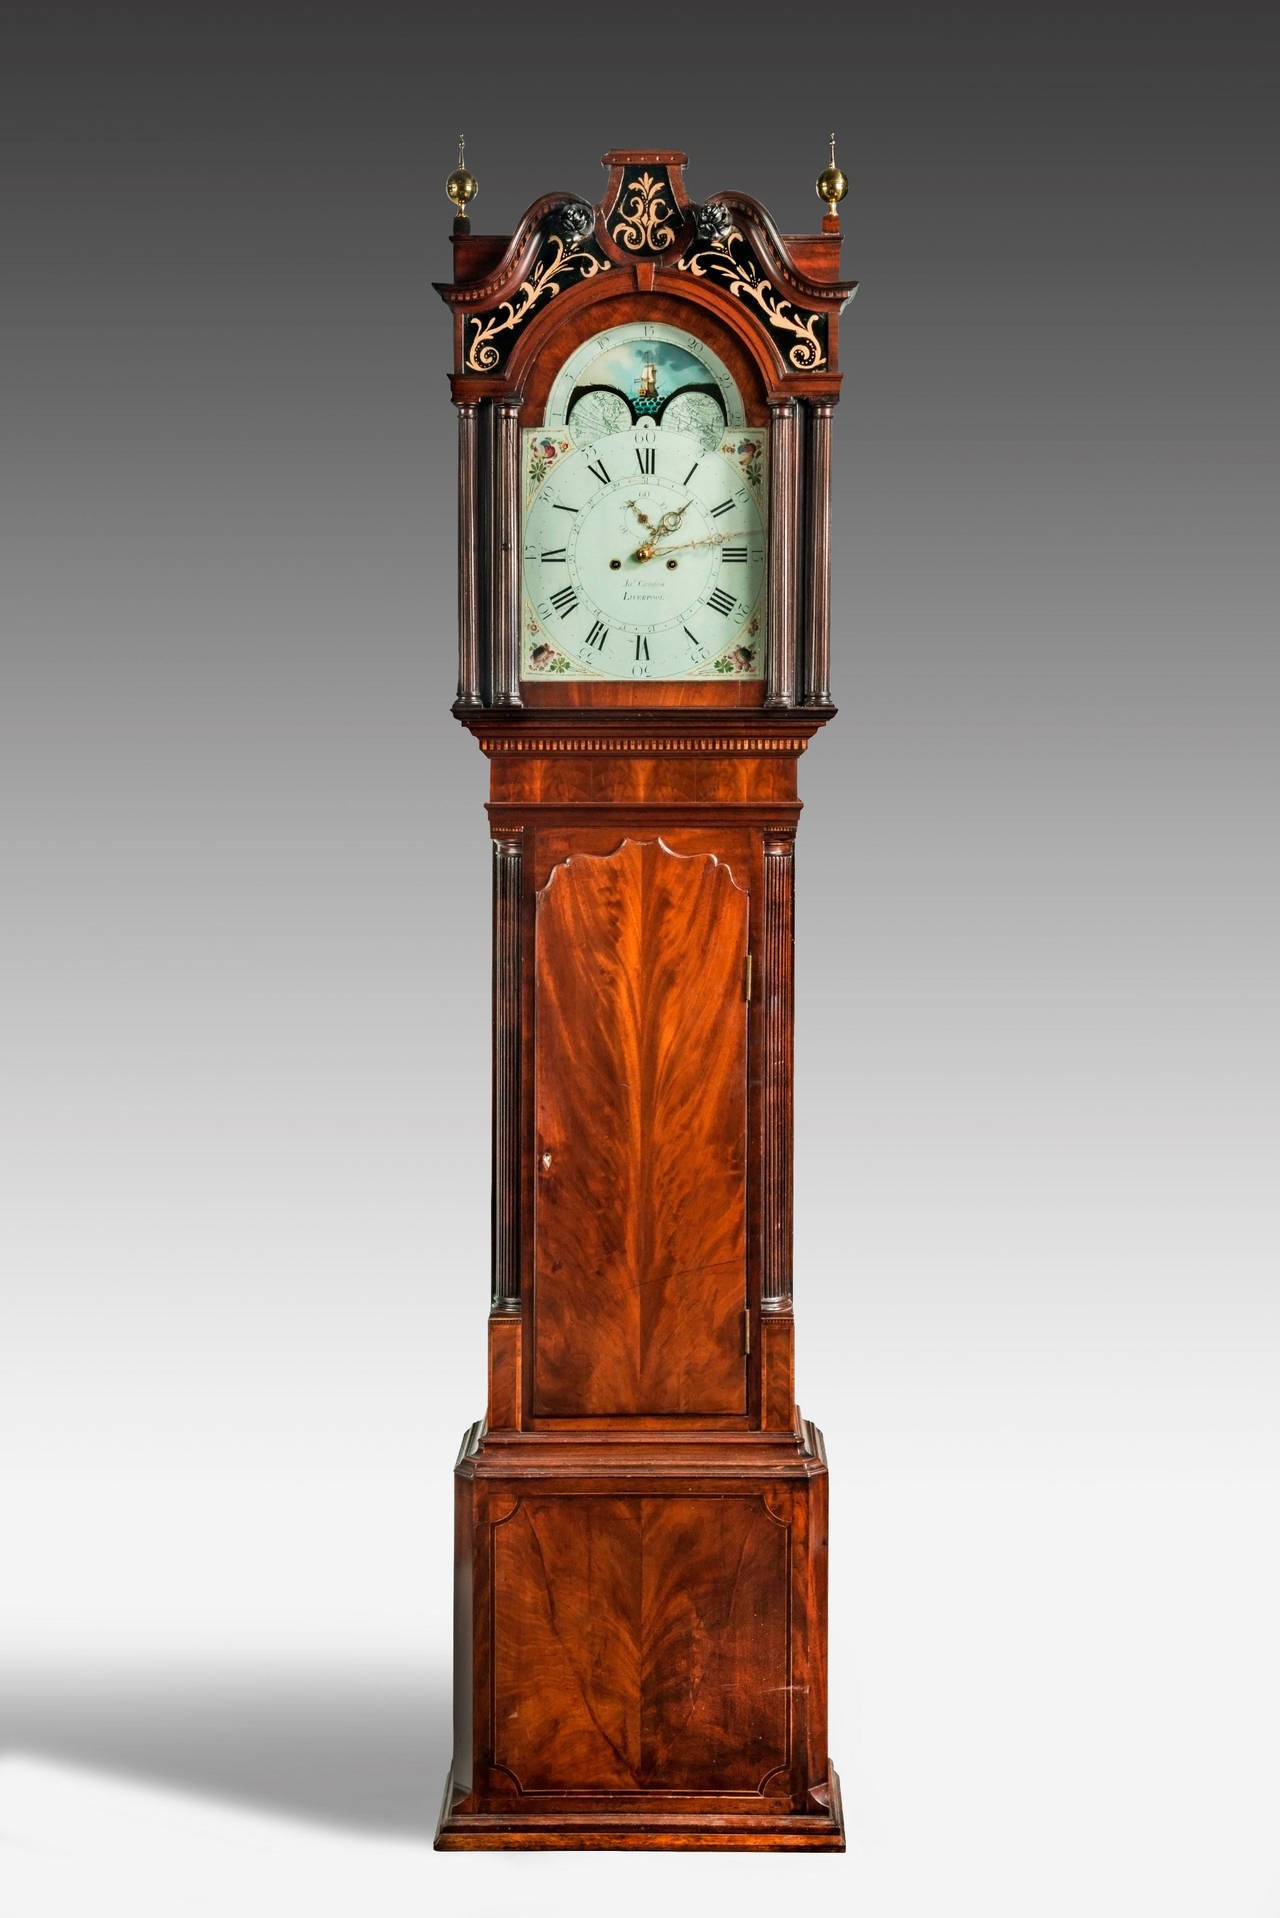 18th century longcase clock by James Cawfon of Liverpool with eight day movement. The swan neck pediment with boxwood dental moulding within with églomisé panels above the two brass finials. The painted dial with phases of the moon depicting a